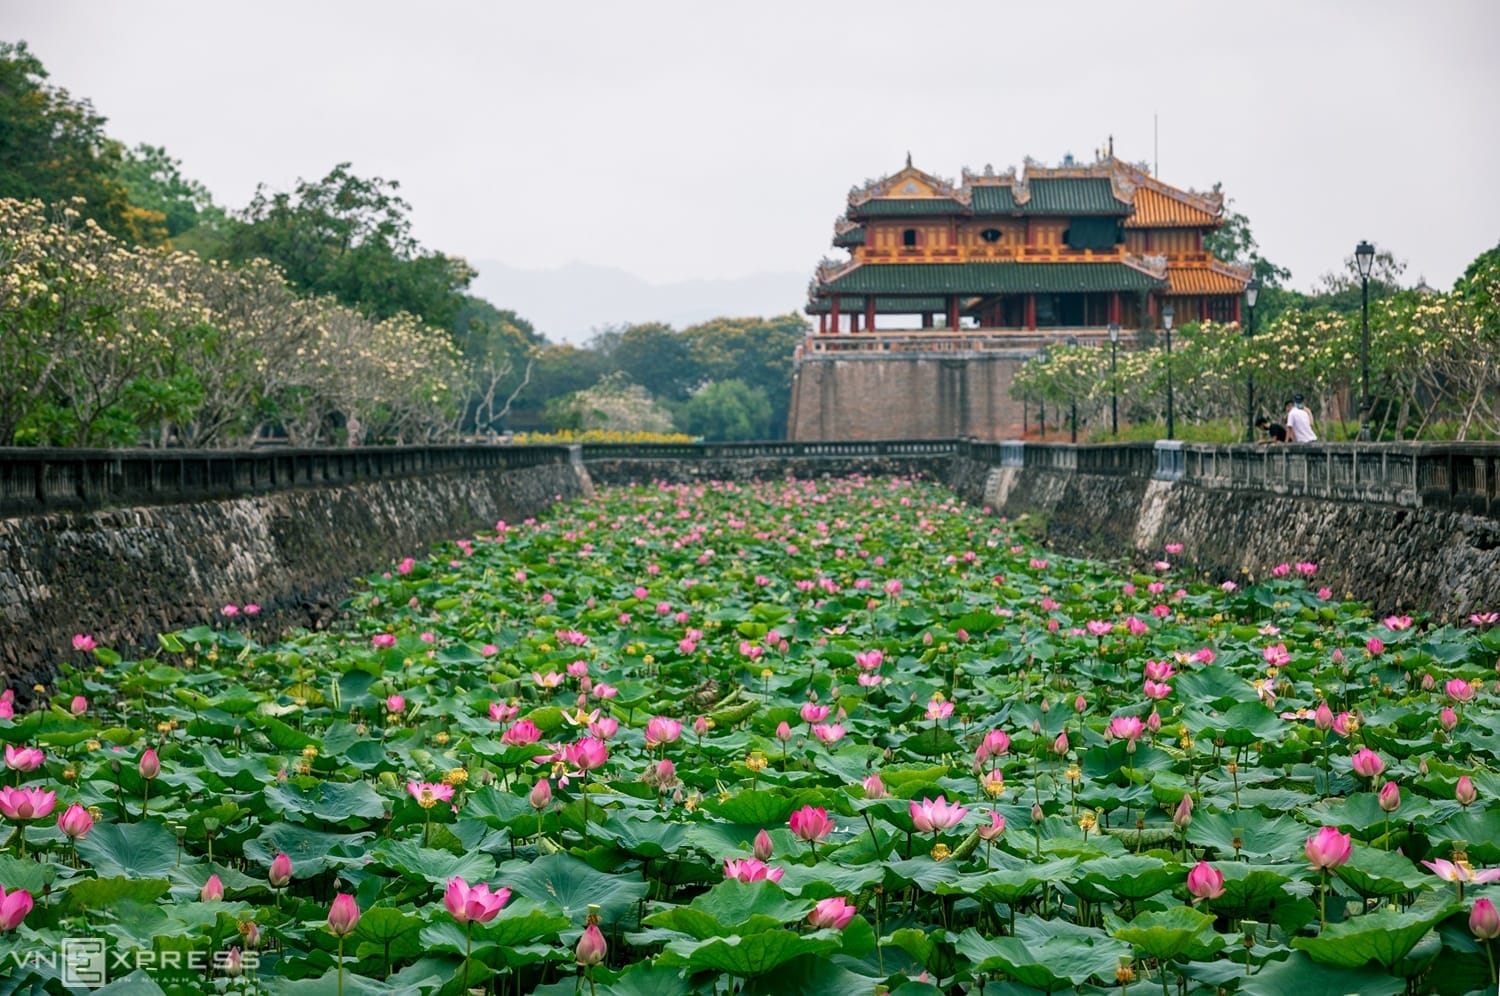 TRAVEL TO HUE: MOST IMPORTANT THINGS YOU NEED TO KNOW!